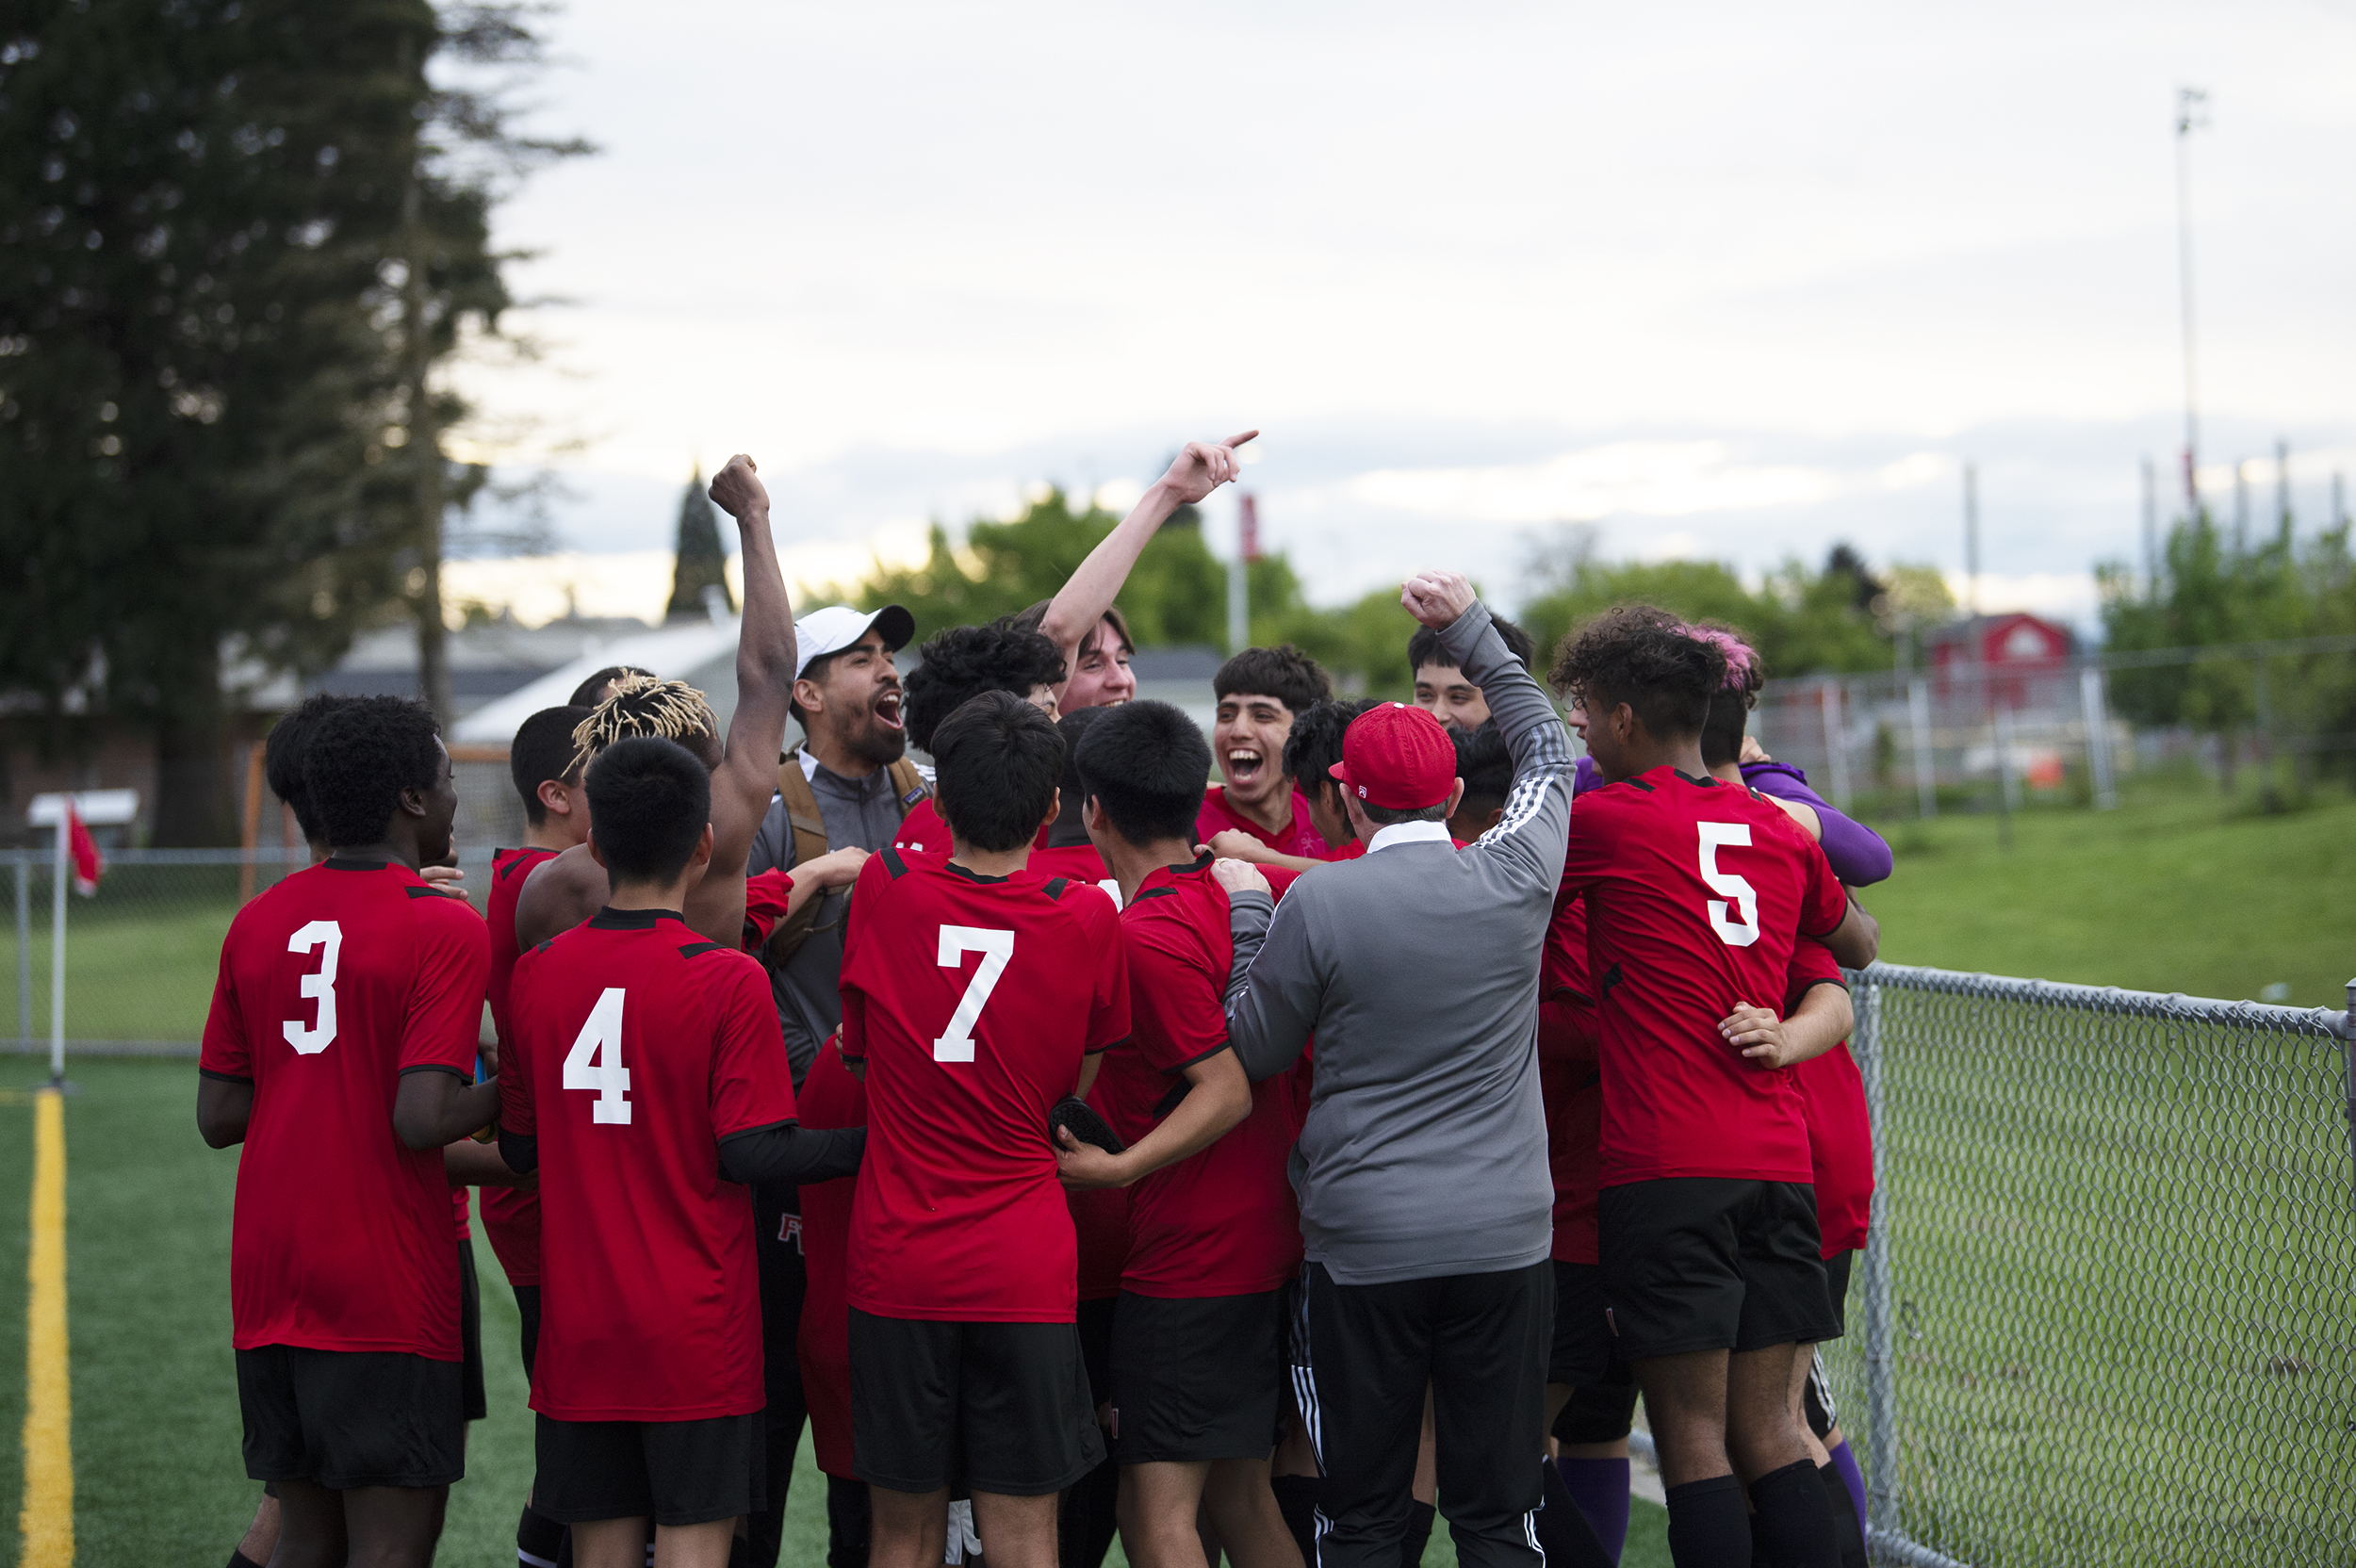 The Fort Vancouver boys soccer team celebrates clinching a state berth after a 2-0 win over Ridgefield in a 2A district playoff at Fort Vancouver on Saturday, May 14, 2022.